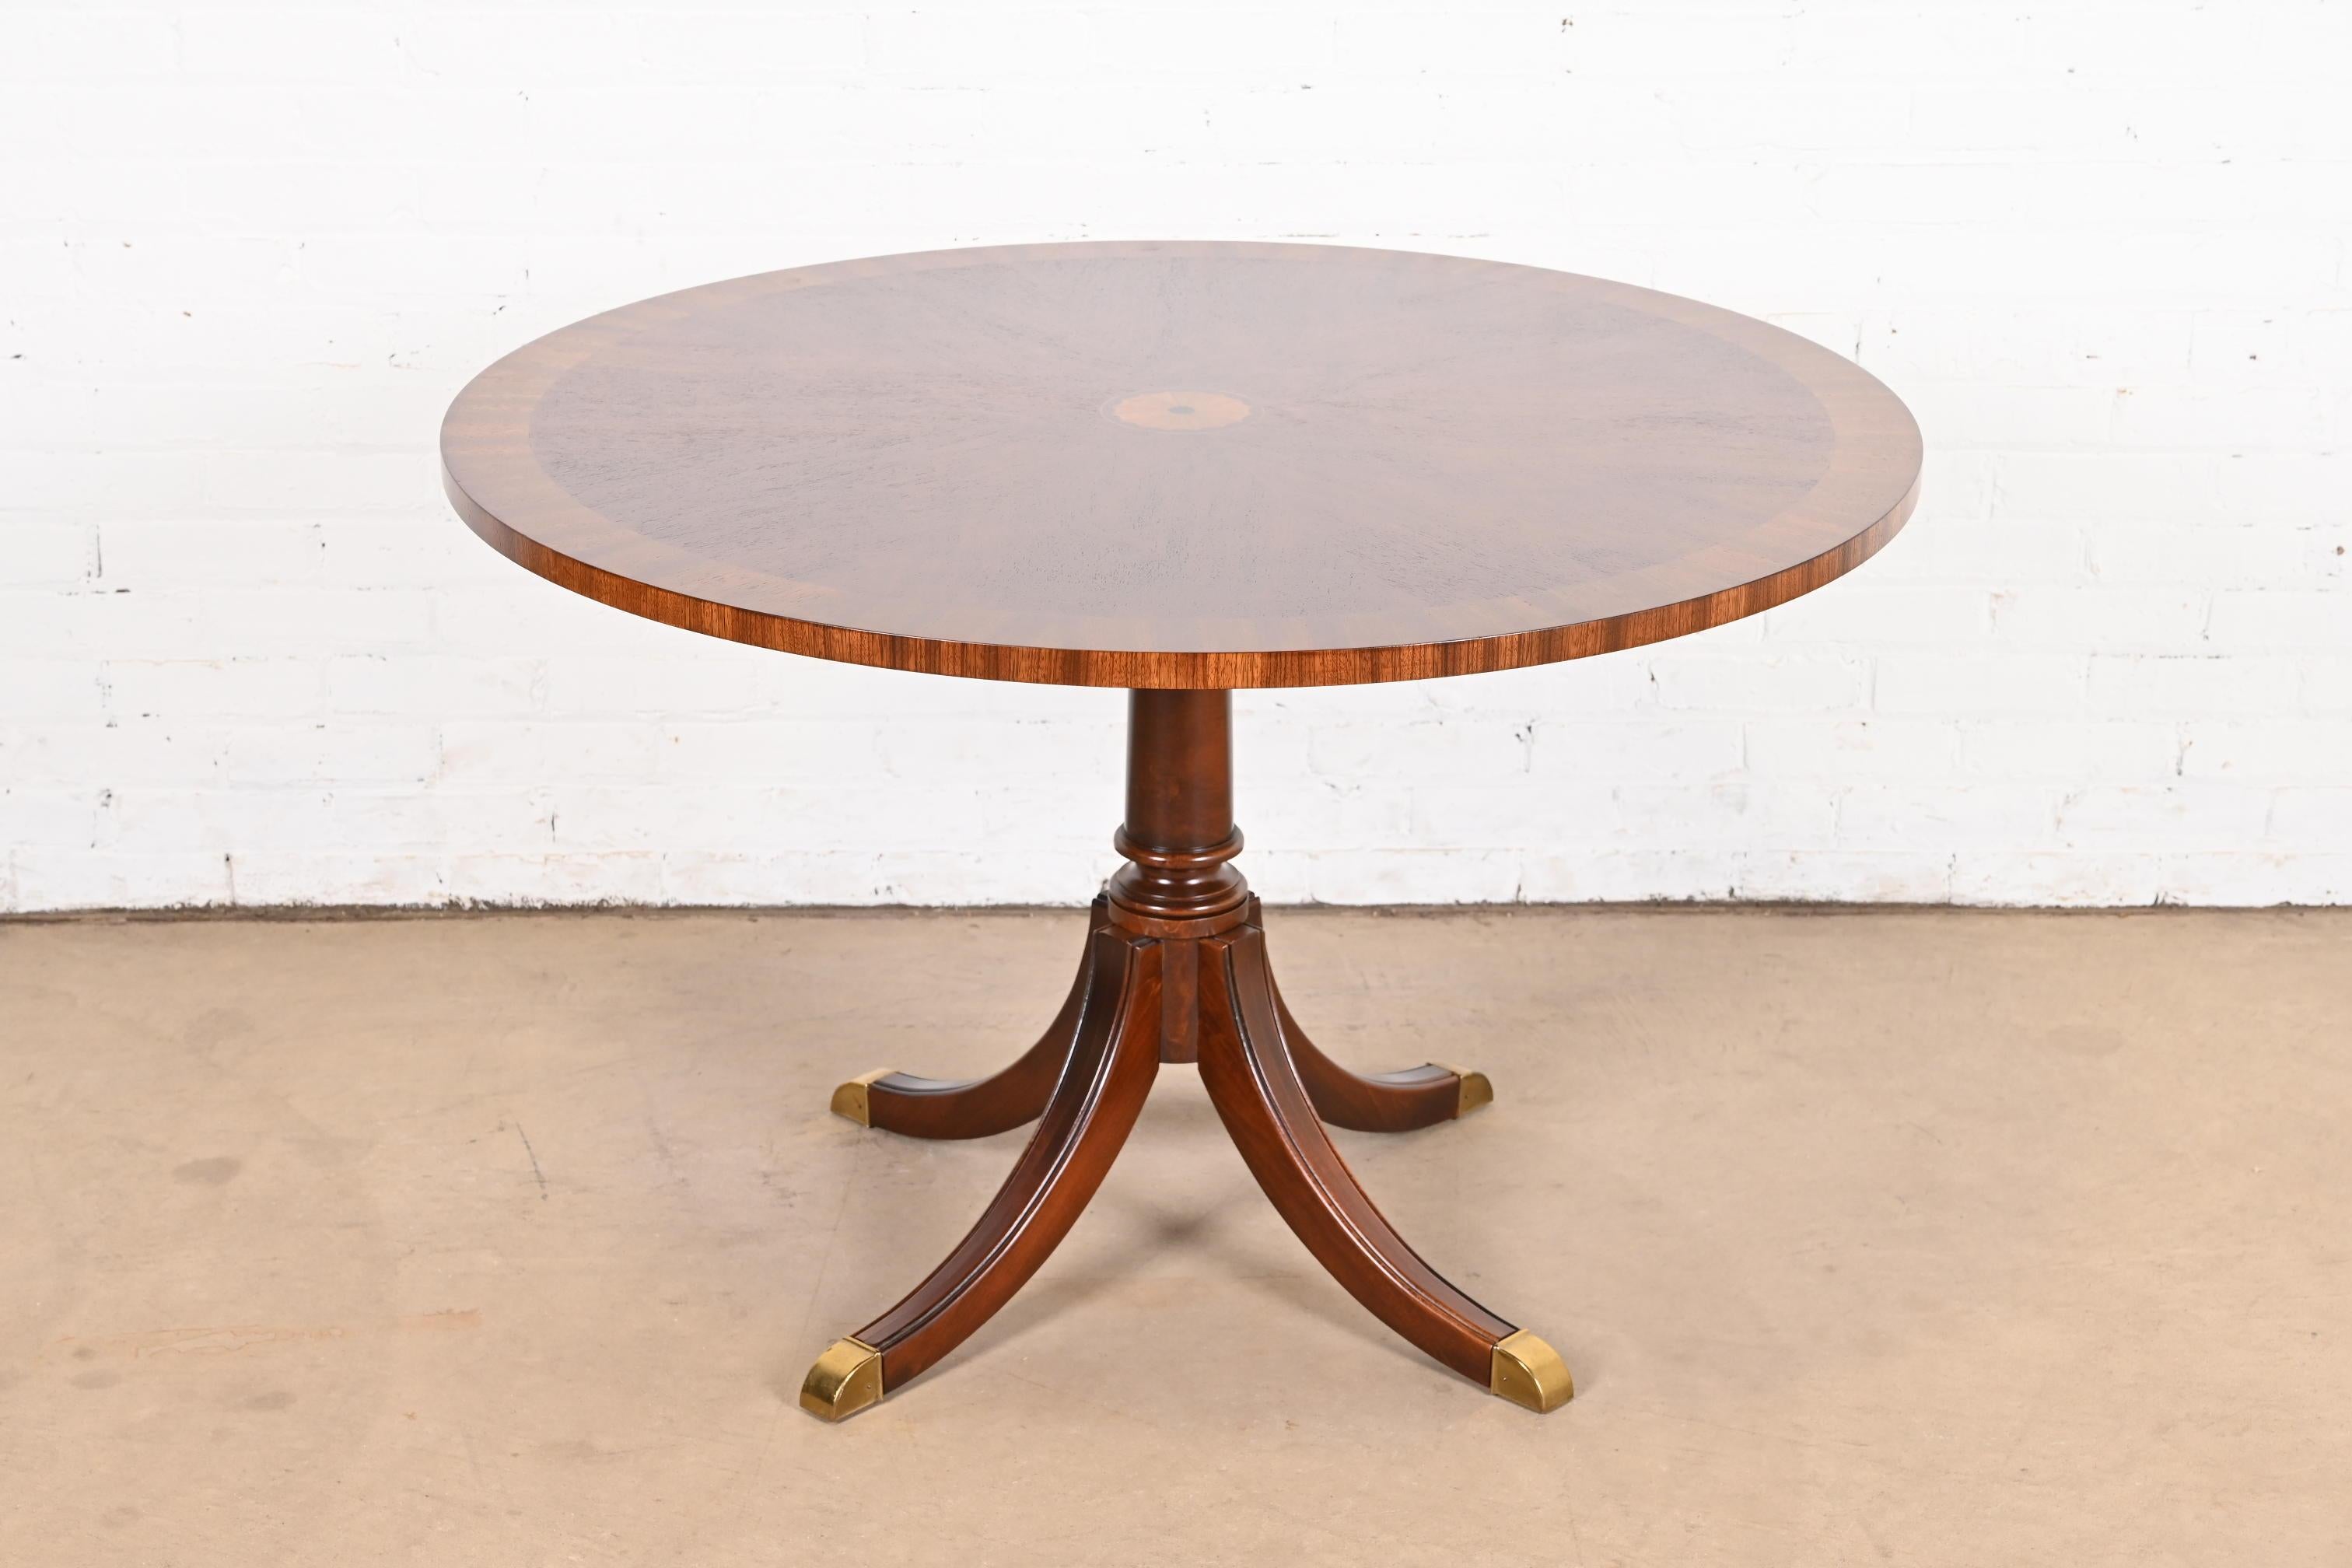 An exceptional Georgian or Regency style pedestal dining table, center table, or breakfast table

In the manner of Kindel Furniture

USA, Circa 1980s

Gorgeous book-matched mahogany, with inlaid satinwood marquetry, and carved solid mahogany